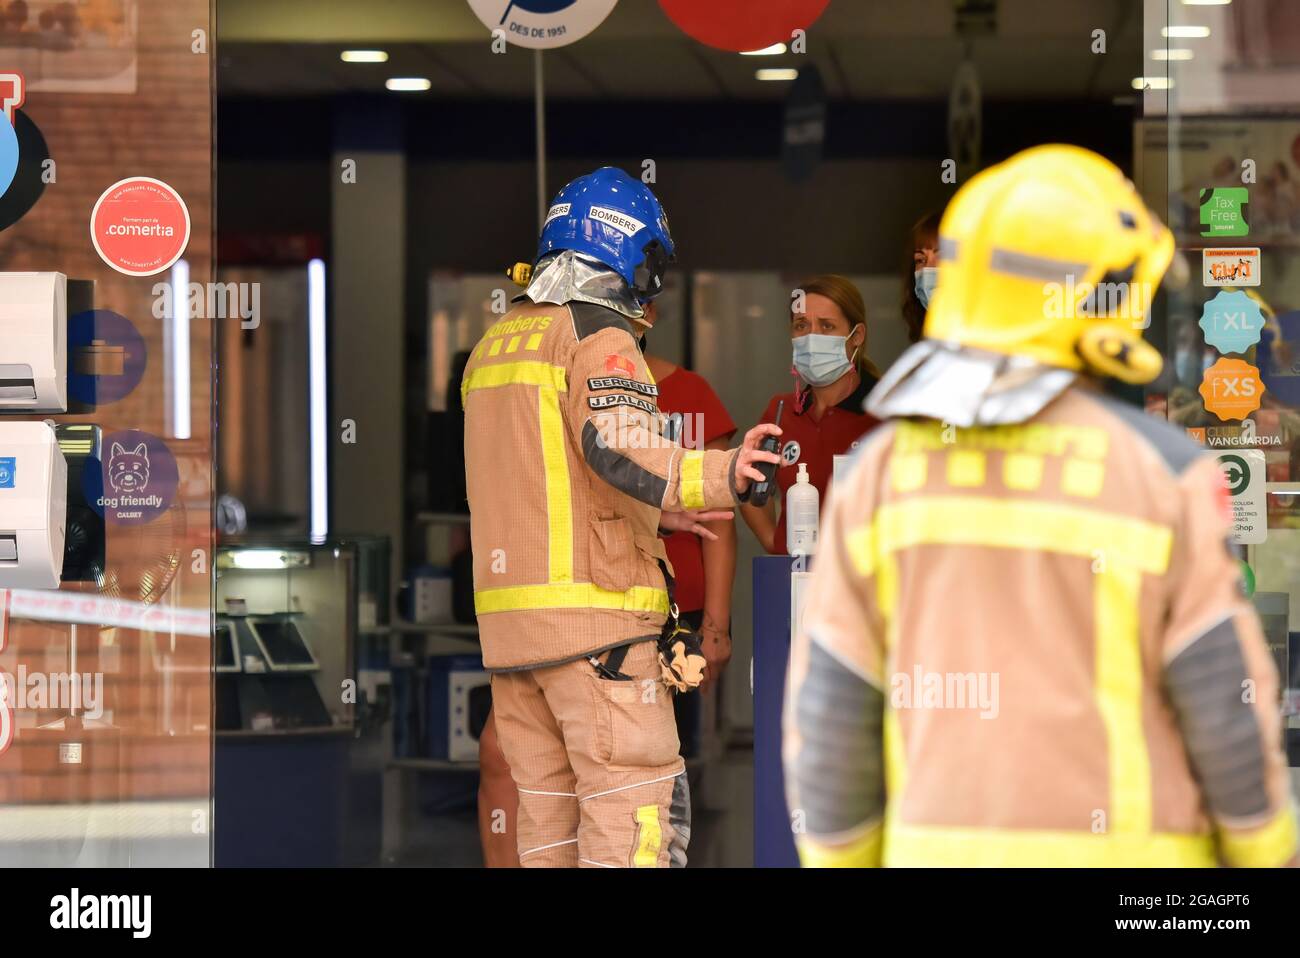 Sergeant J Palau of the Catalonia Firefighters speaks to the employees of an electrical appliance store to leave the area due to a possible gas leak in Vendrell. A strong smell of gas alerted the residents of San Jordi Street, Vendrell where three teams of Catalonia Firefighters and several Local Police patrols attended closing access to the affected area. Firefighters with the help of technicians of the gas company began the gas measurements since the smell was coming from the underground sewer network and the presence of vapors or levels of propane, butane or natural gas was ruled out, hence Stock Photo